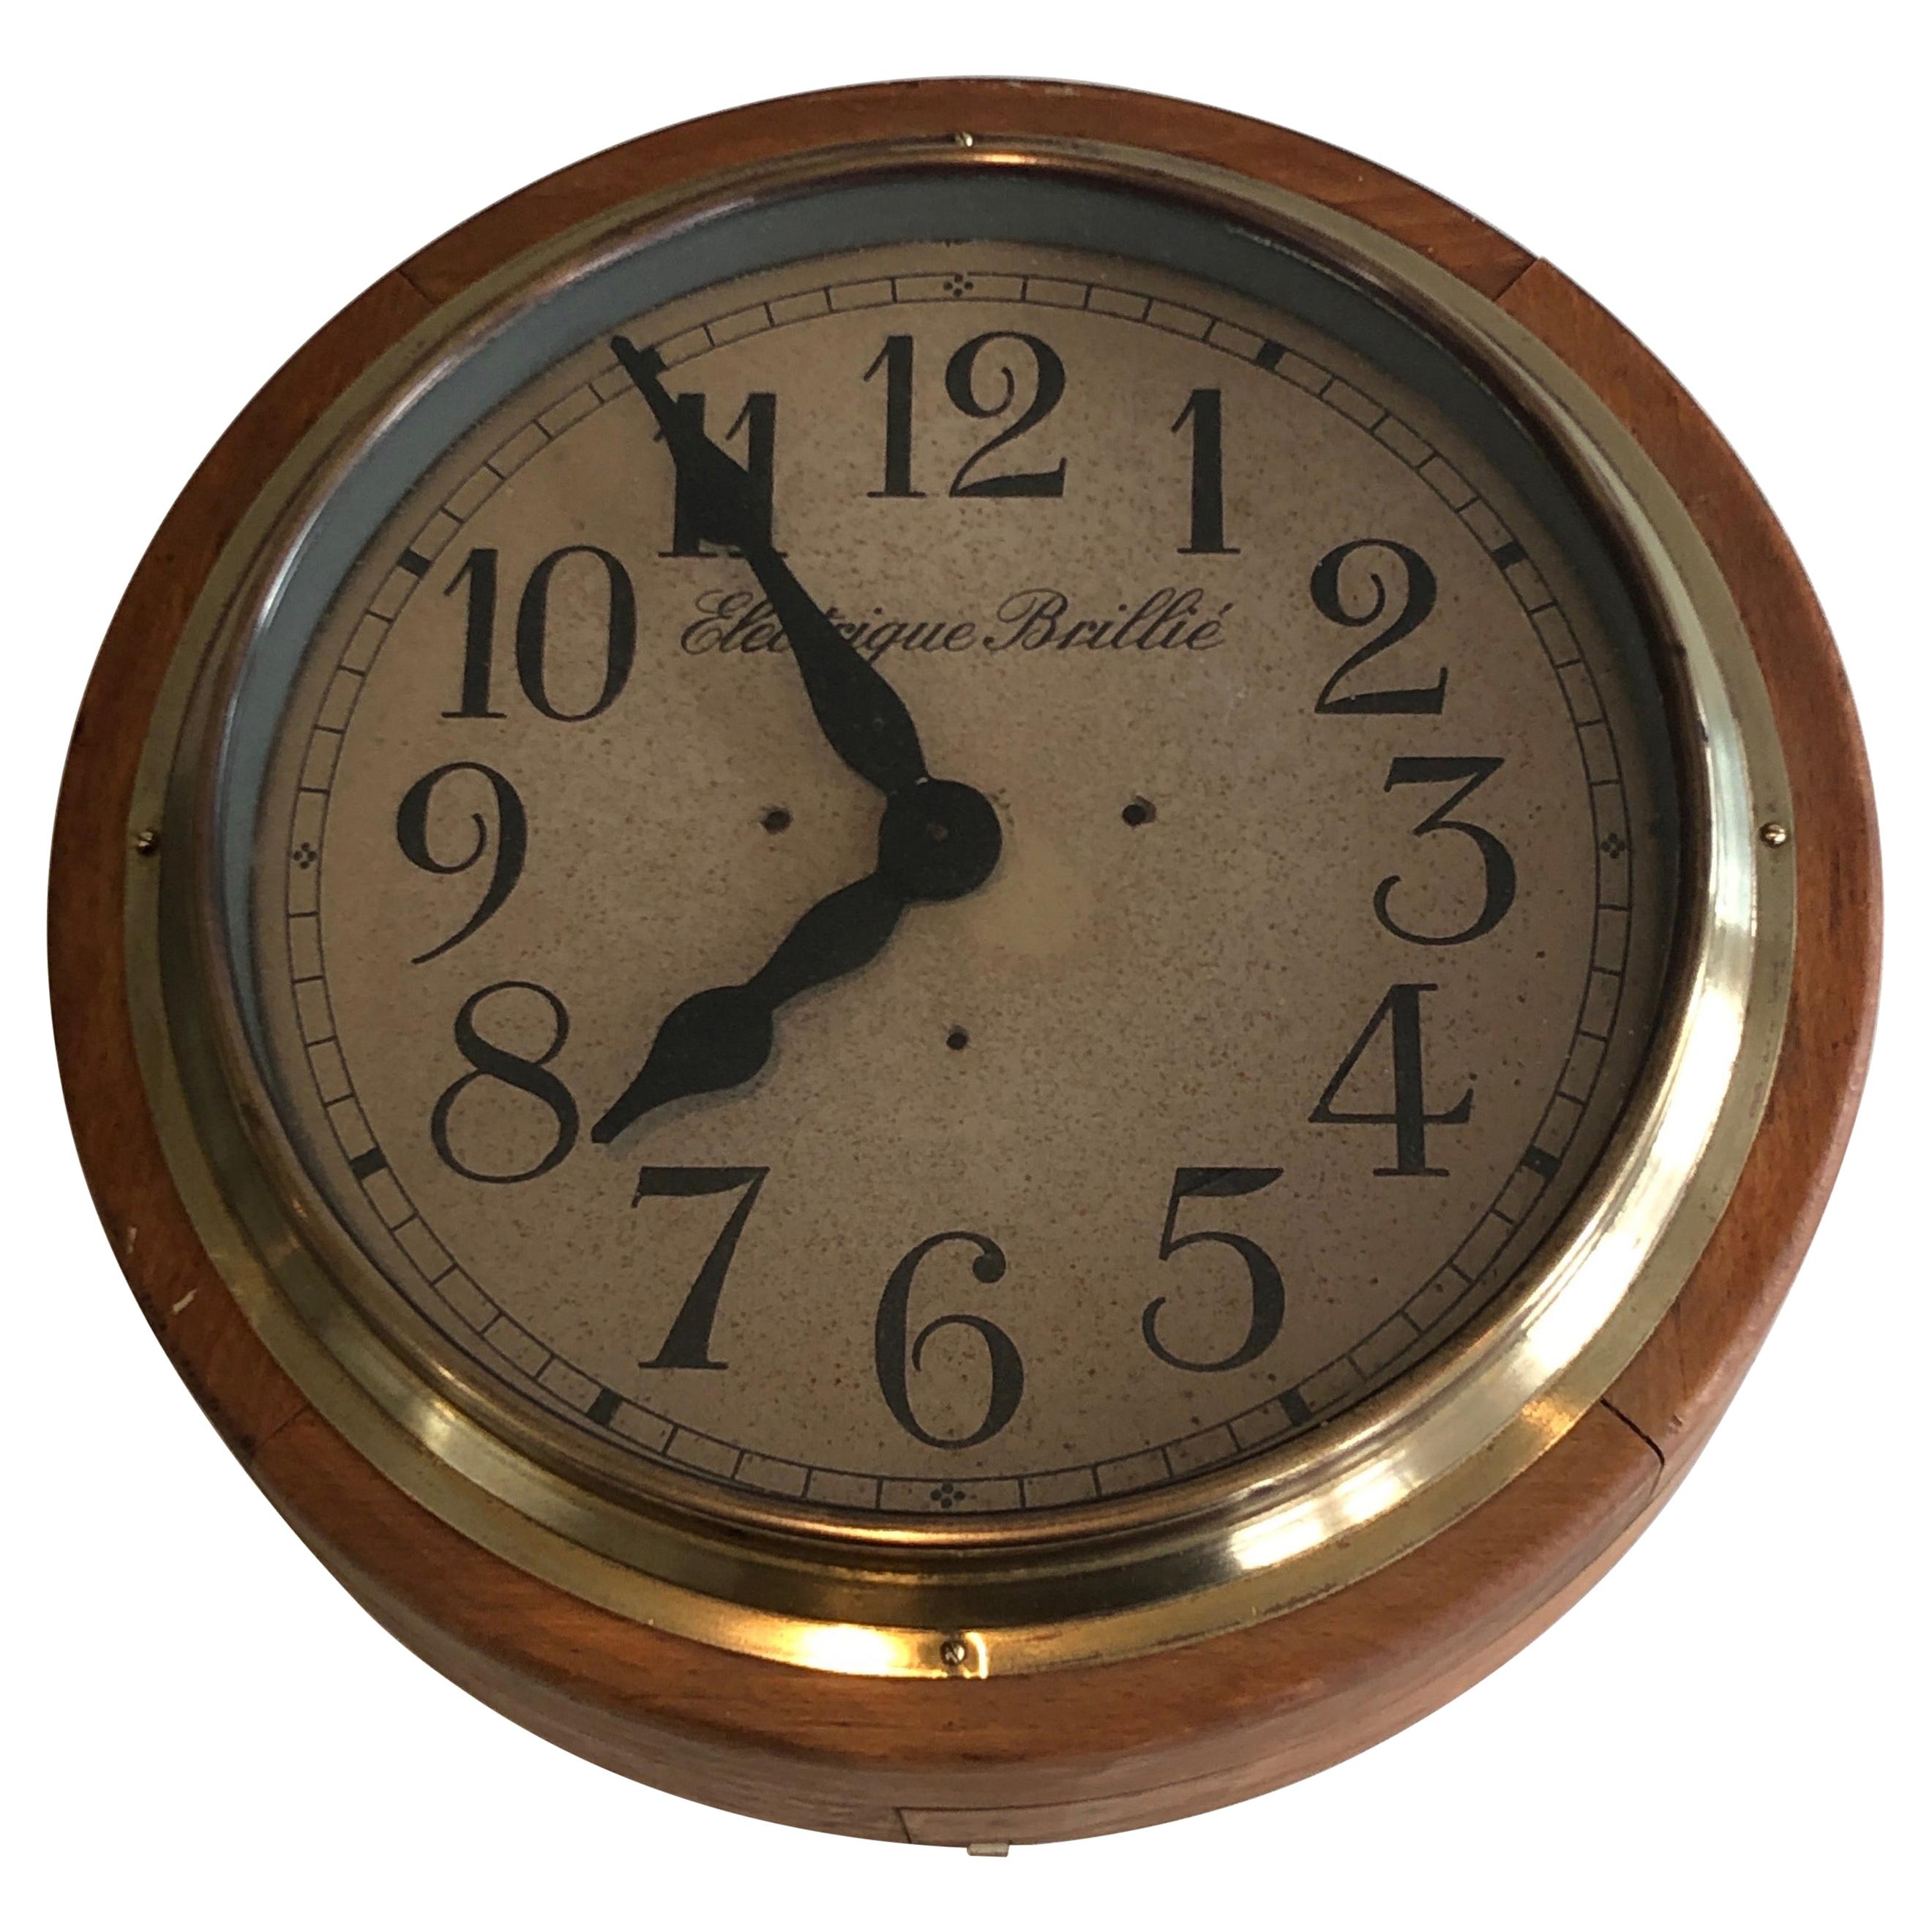 Wood and Brass Clock, Signed Electrique Brillé, French, Circa 1900